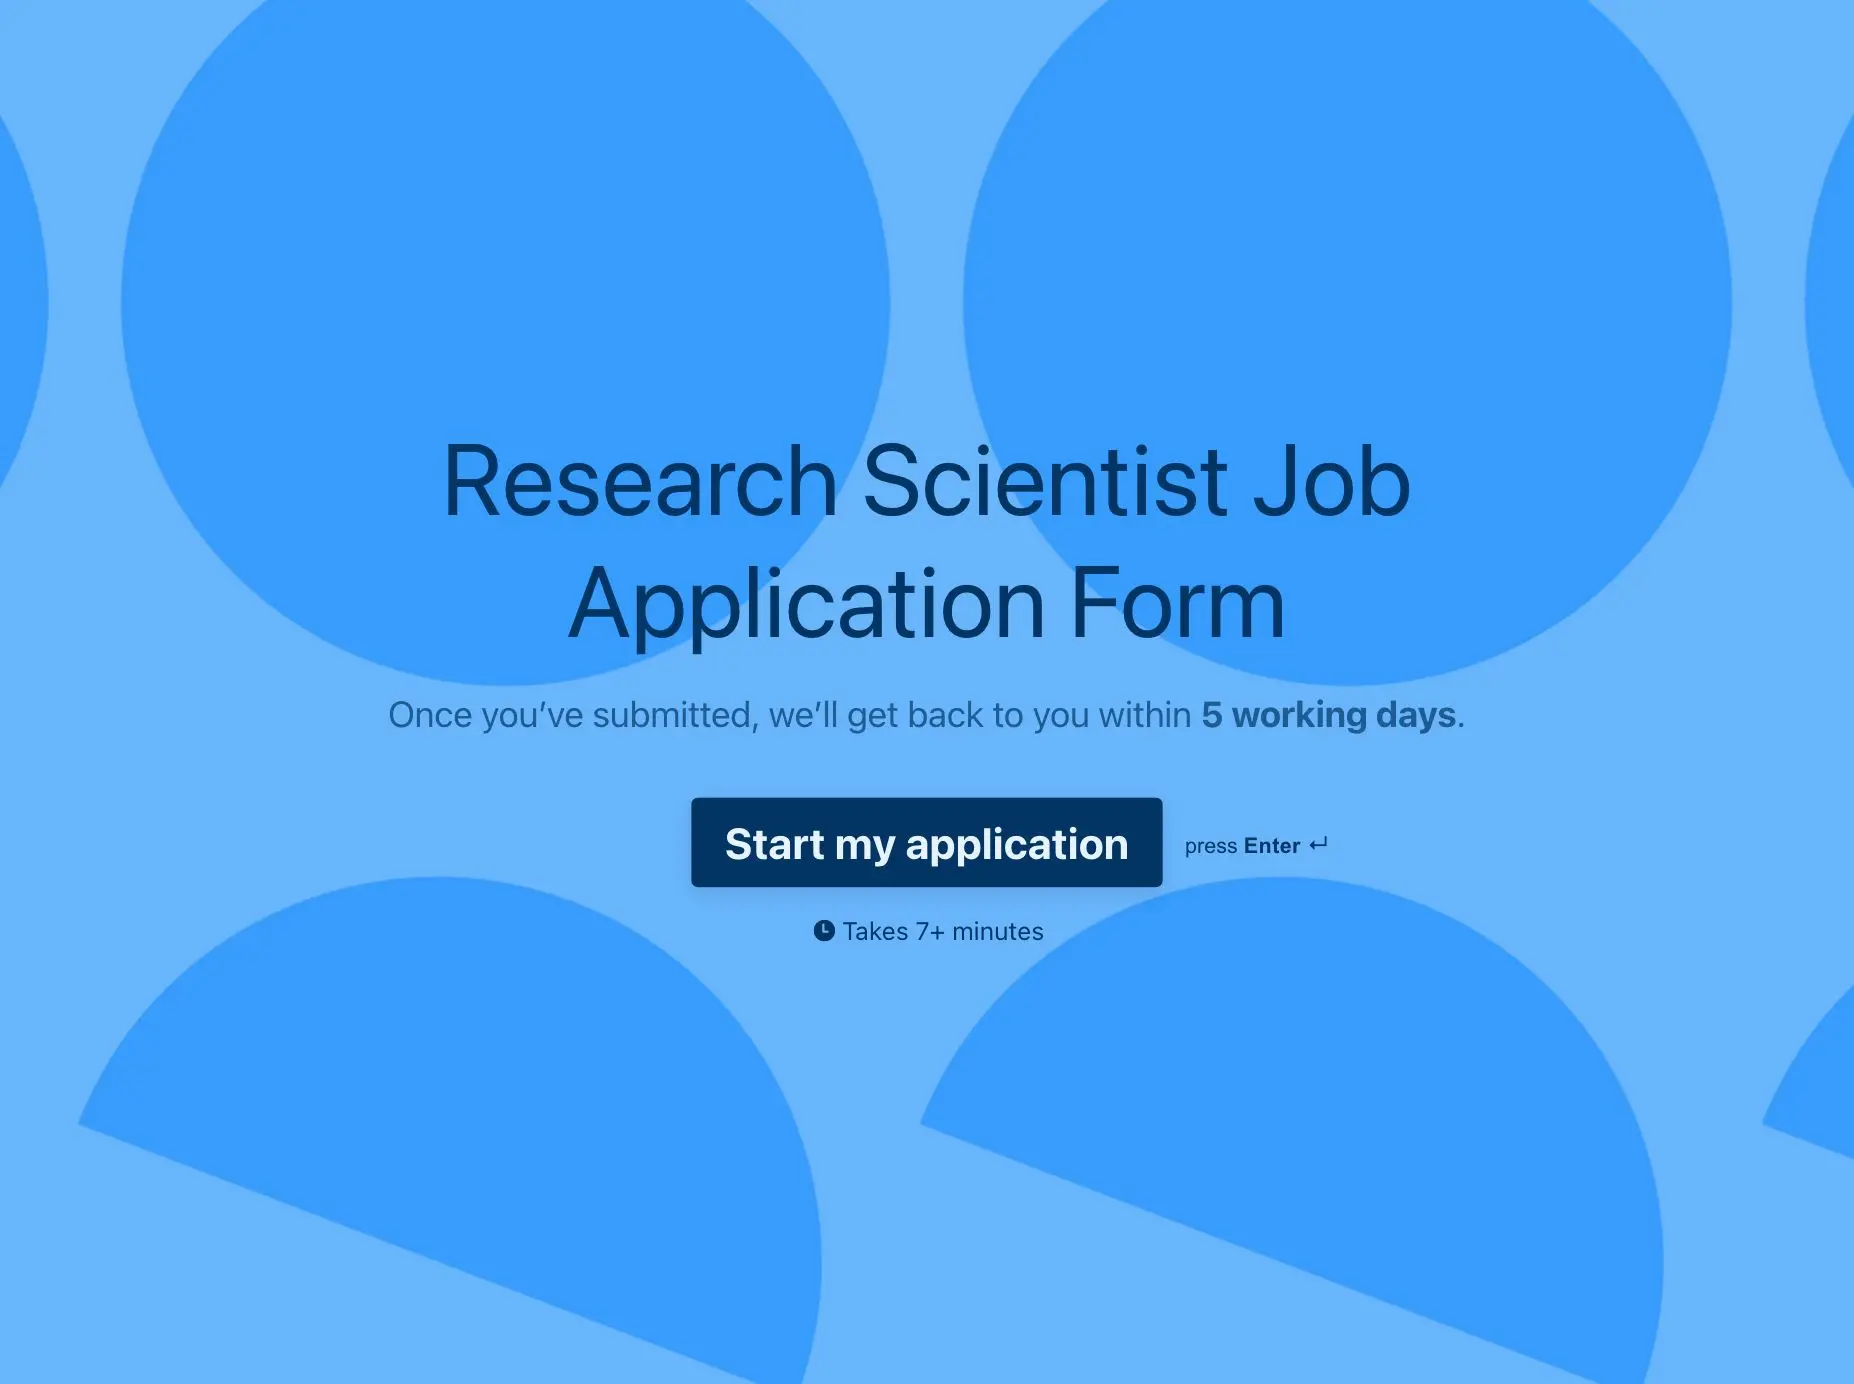 Research Scientist Job Application Form Template Hero